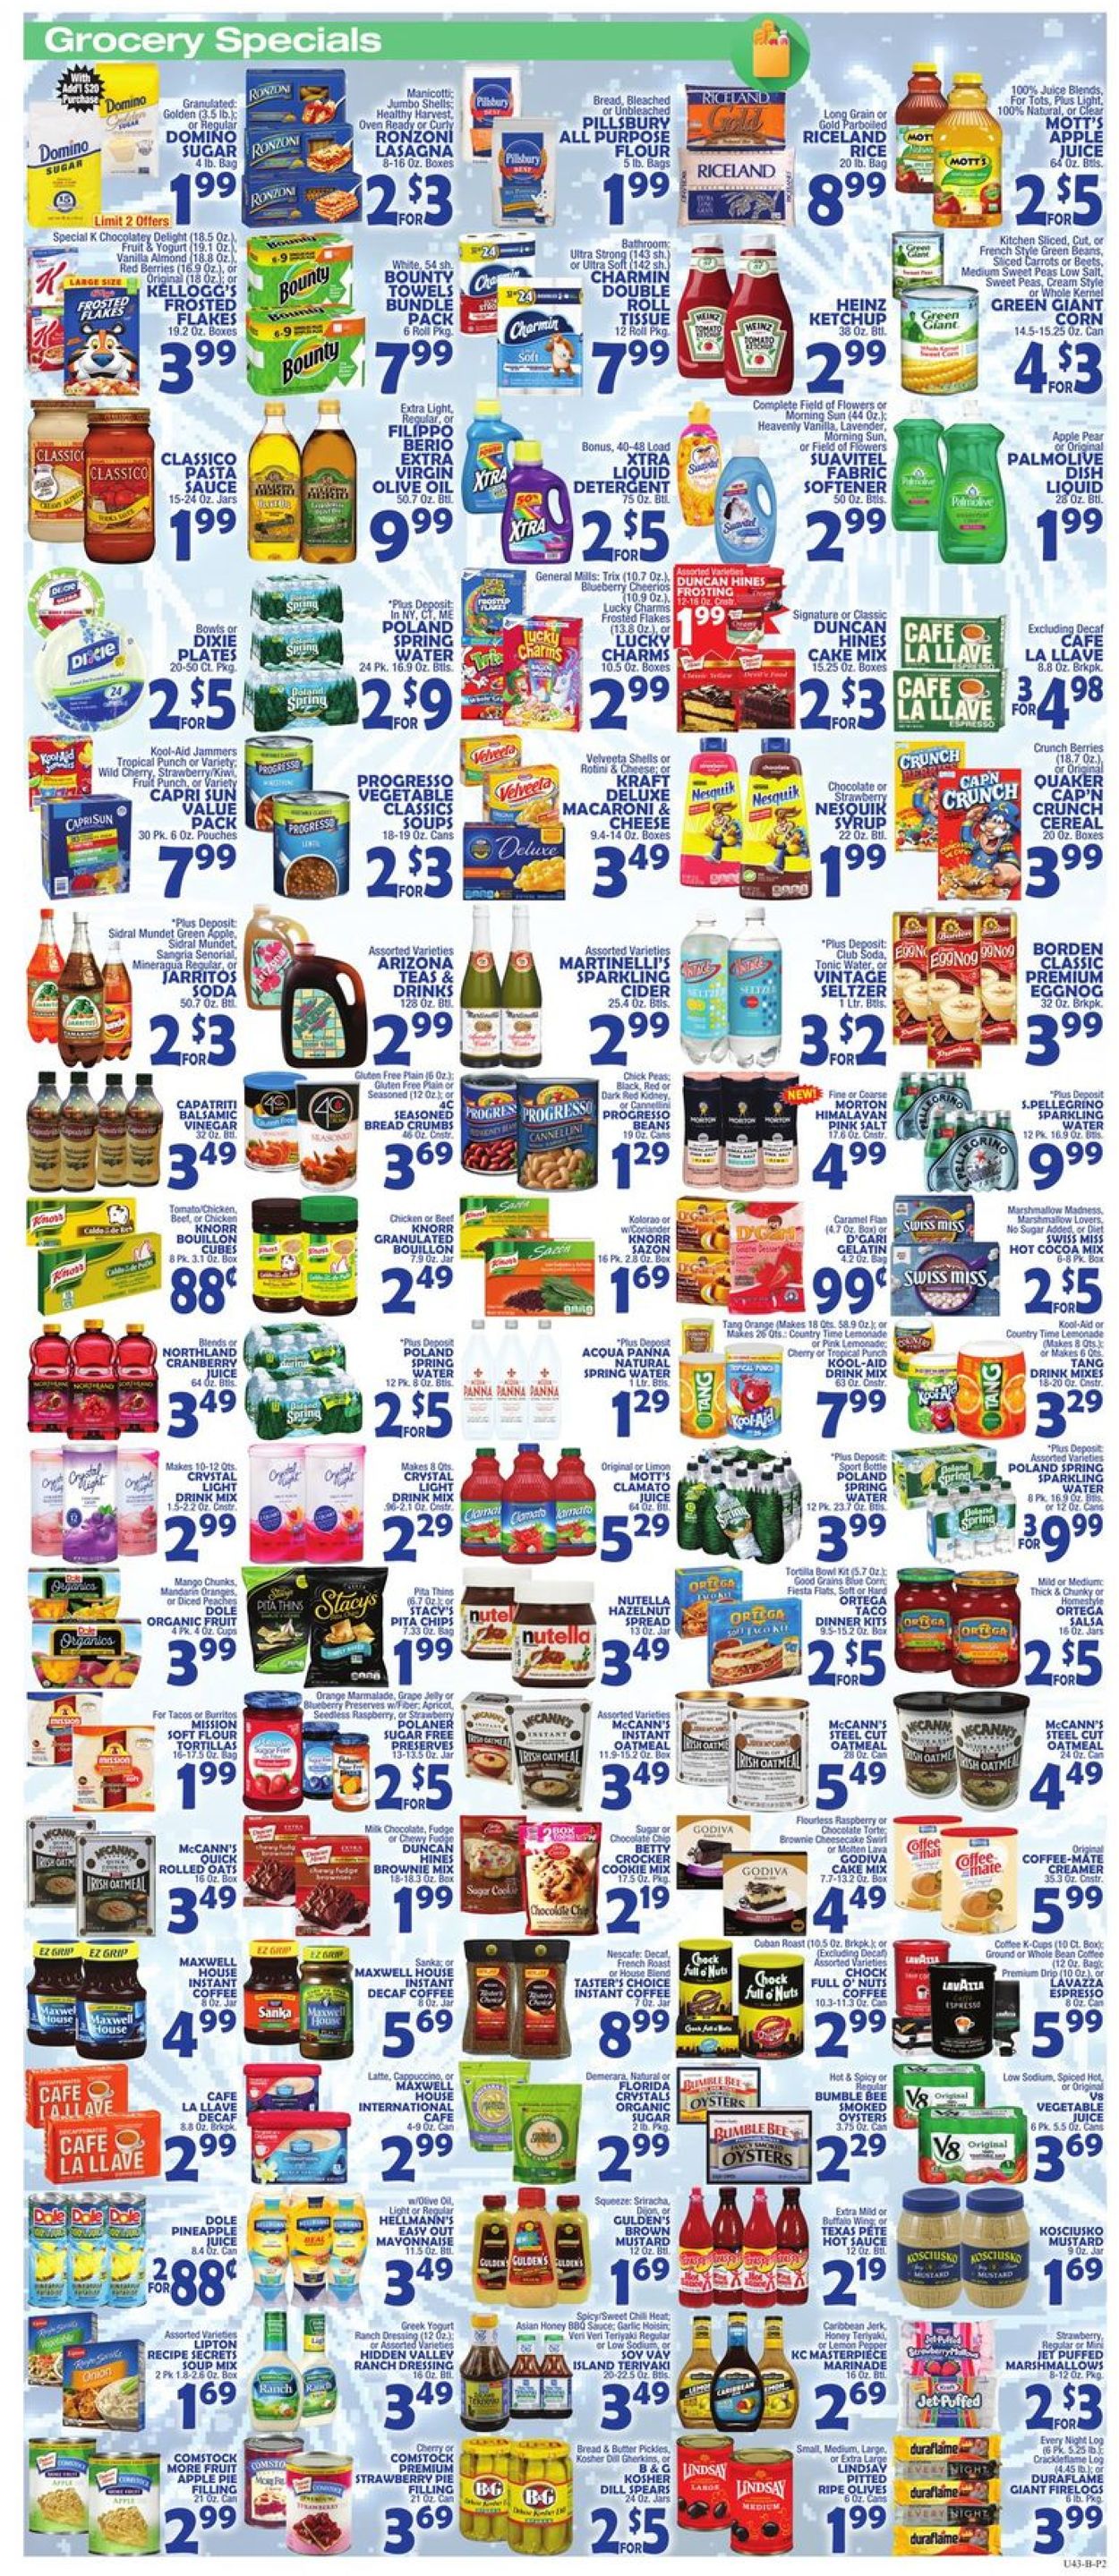 Catalogue Bravo Supermarkets - New Year's Ad 2019/2020 from 12/27/2019